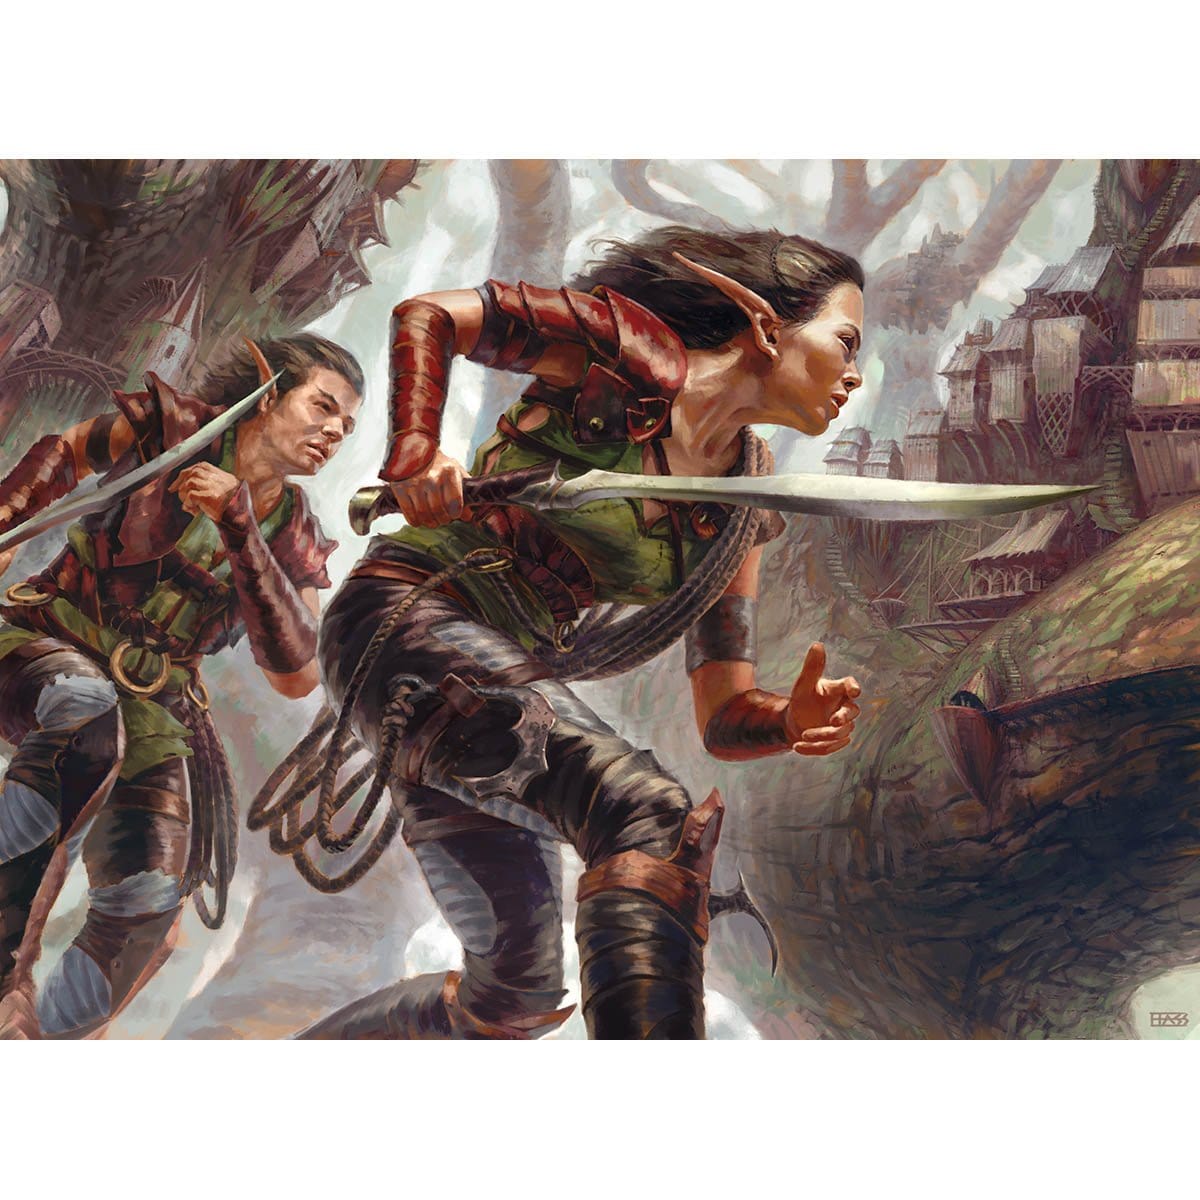 Wood Elves Print - Print - Original Magic Art - Accessories for Magic the Gathering and other card games